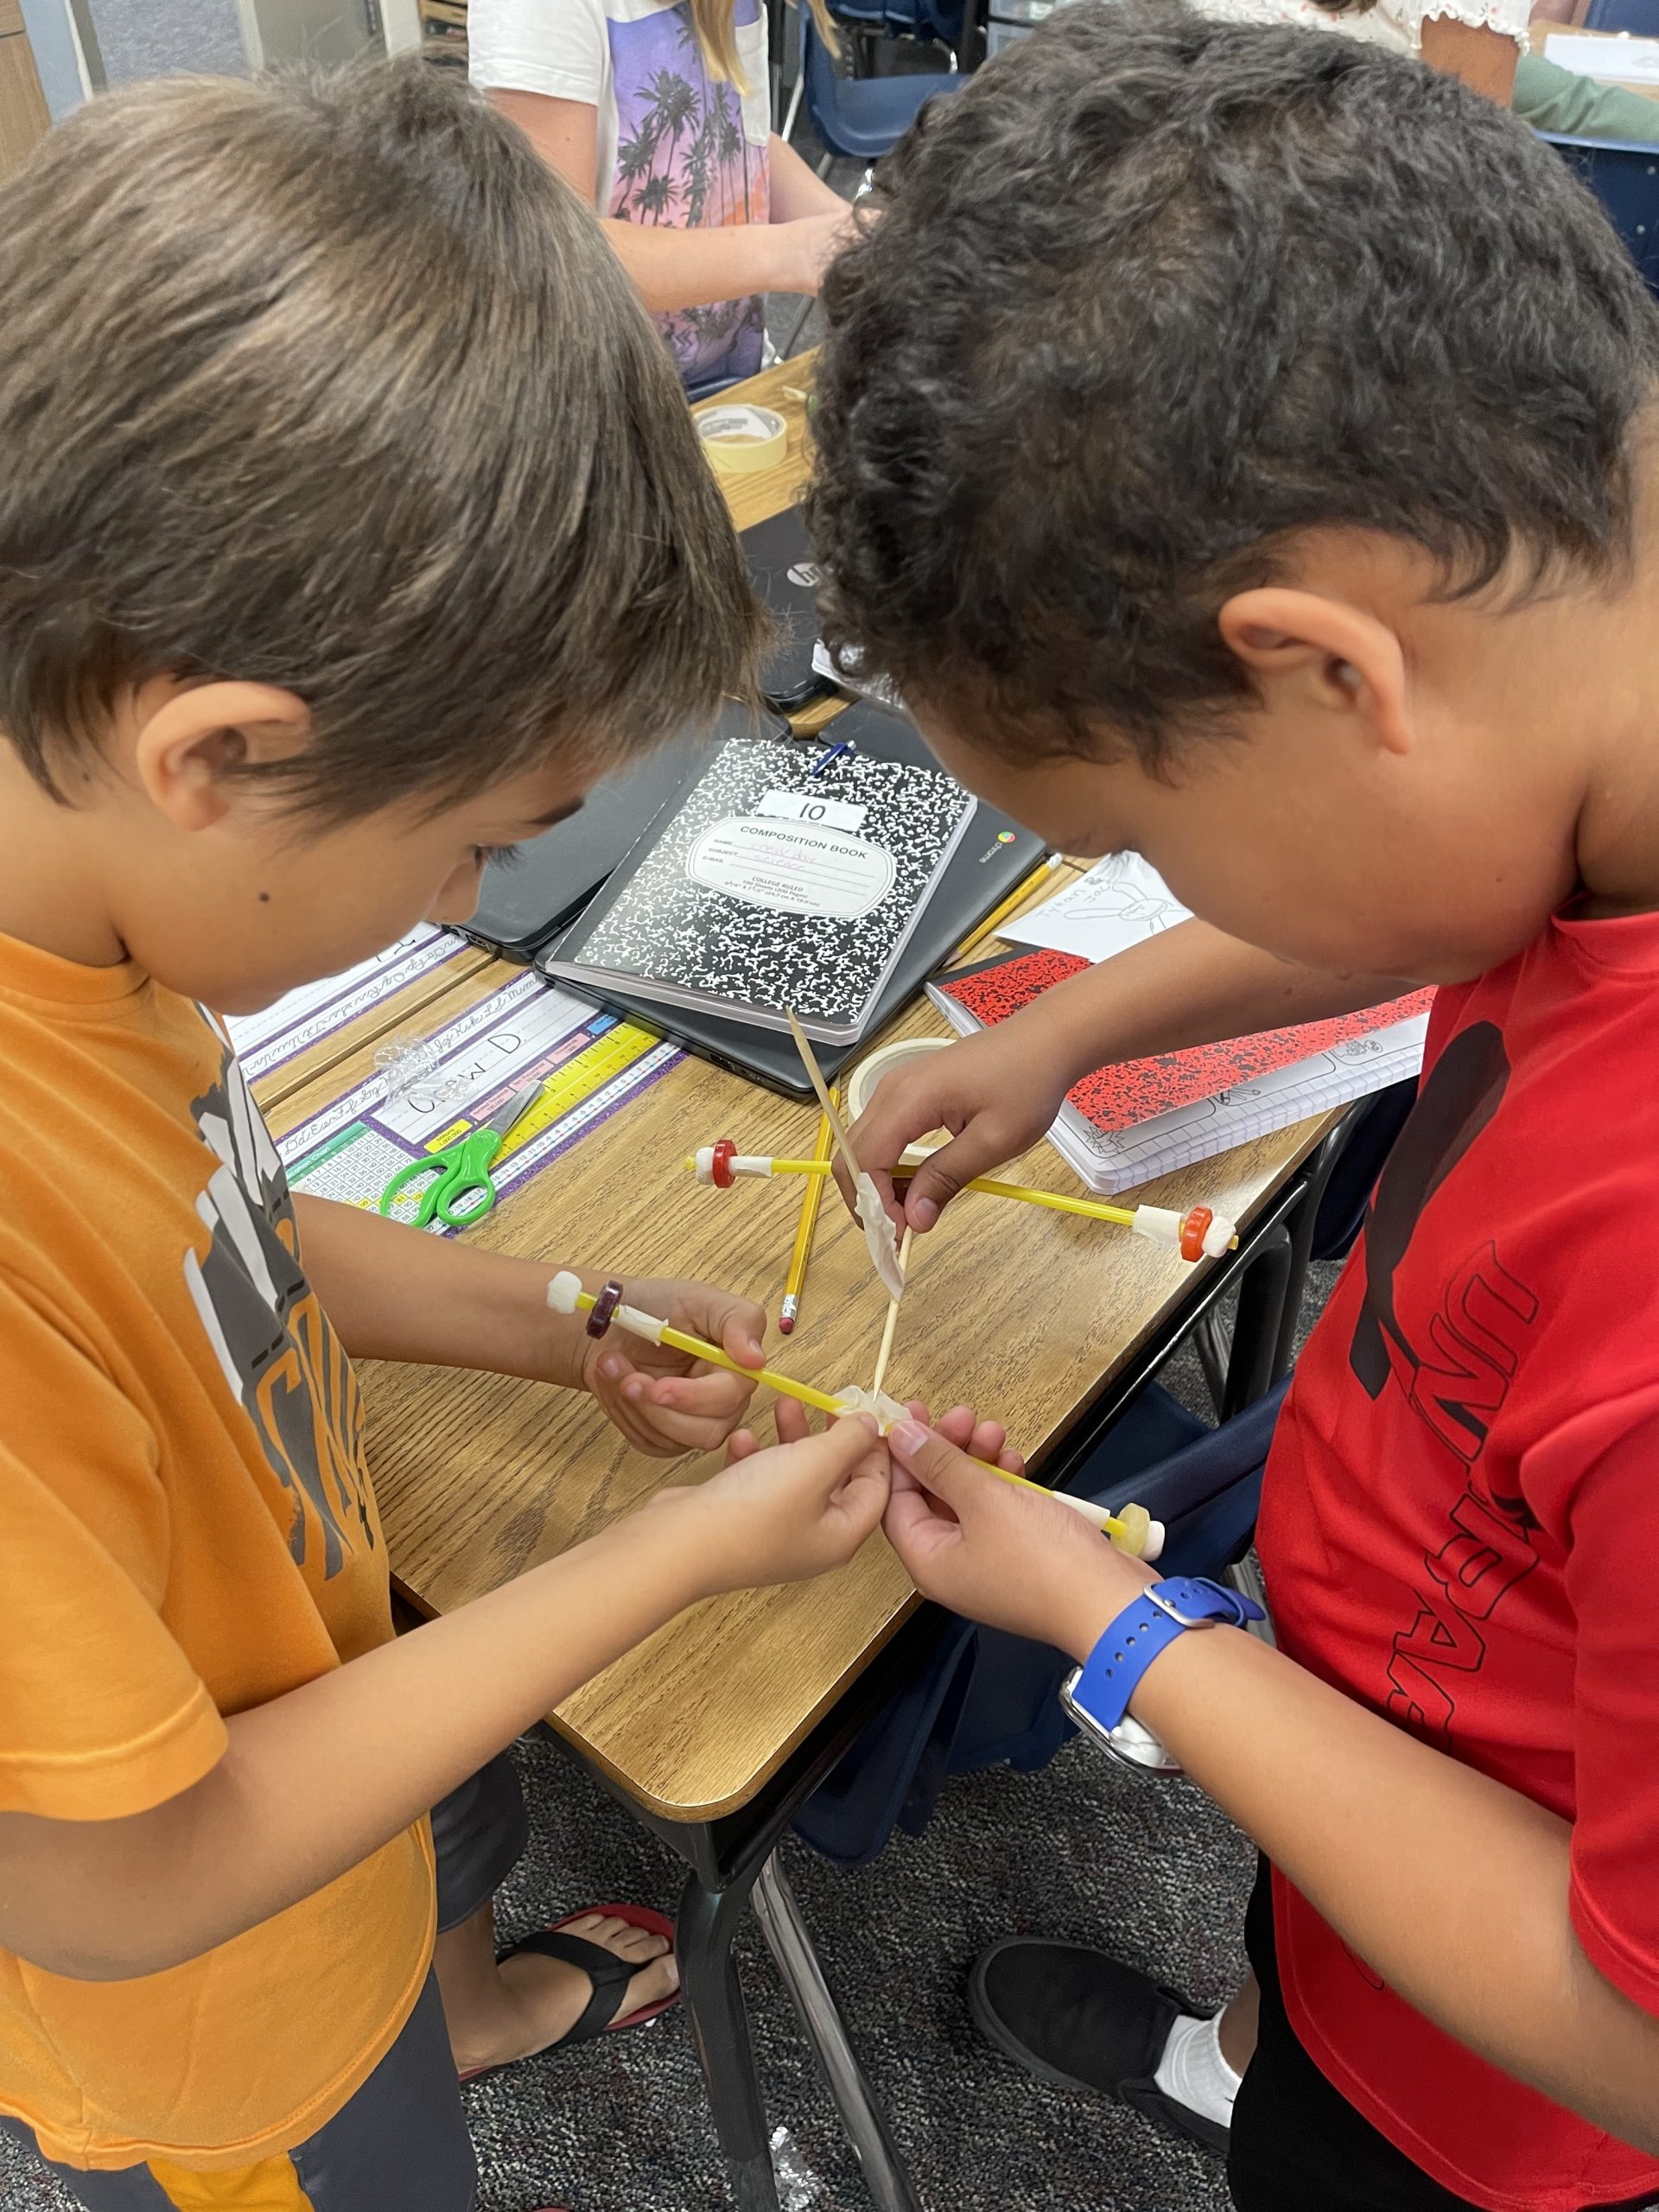 Students working together on a stem project